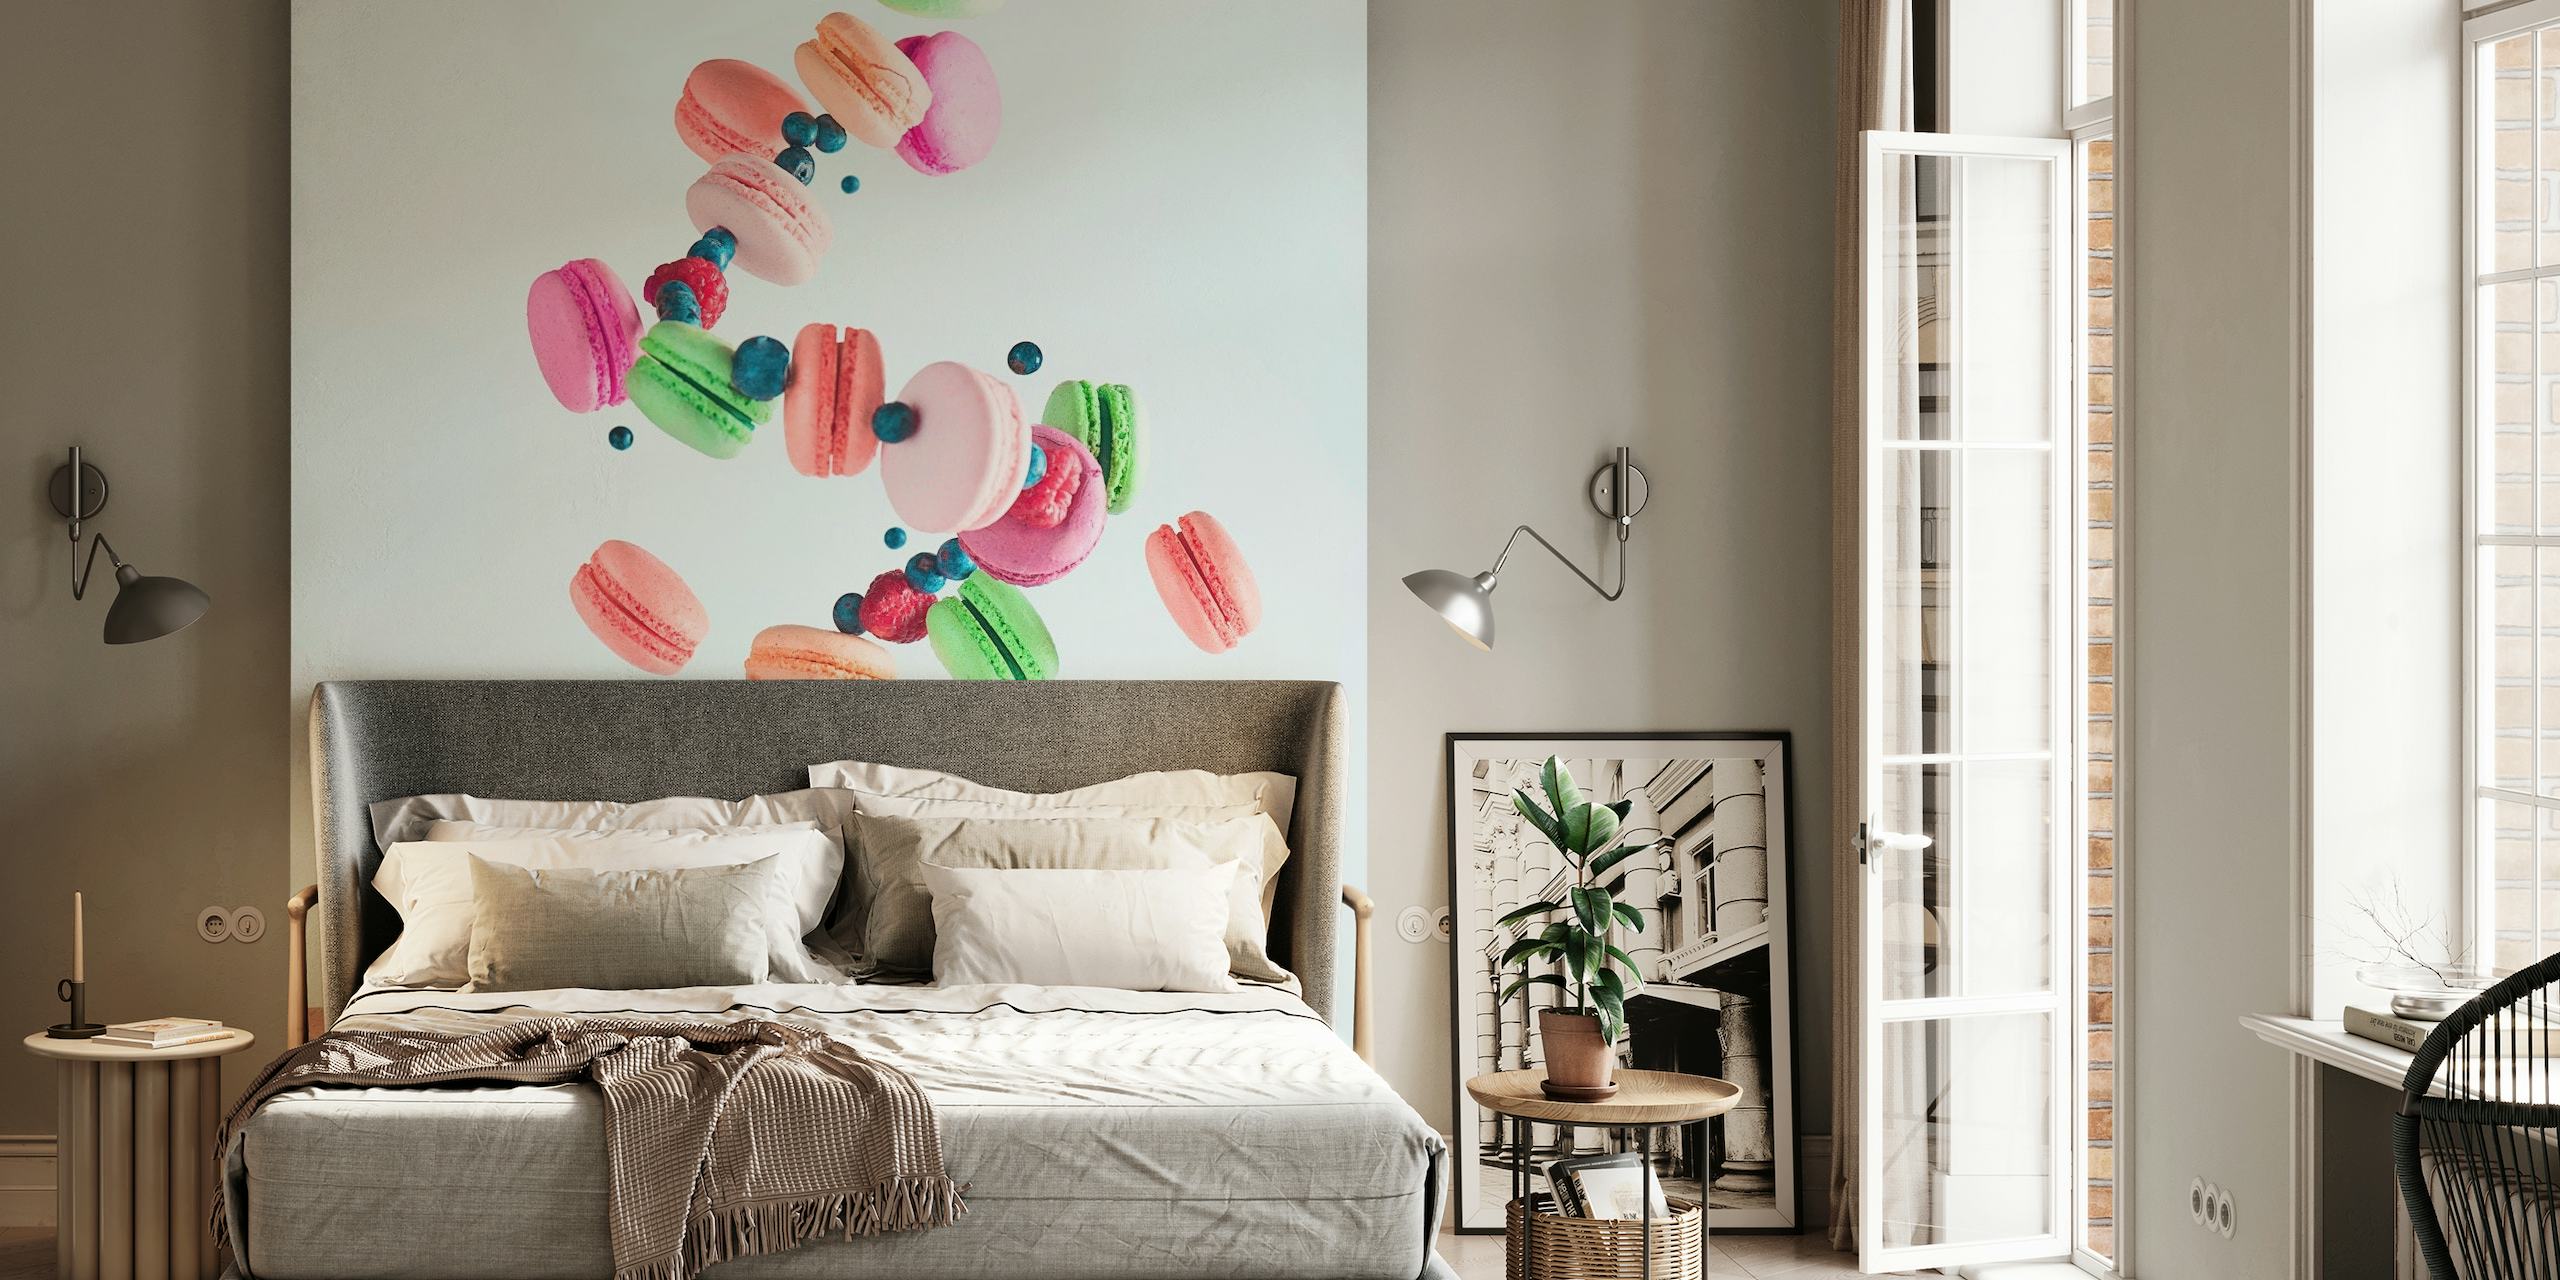 Floating colorful macarons wall mural with a hand